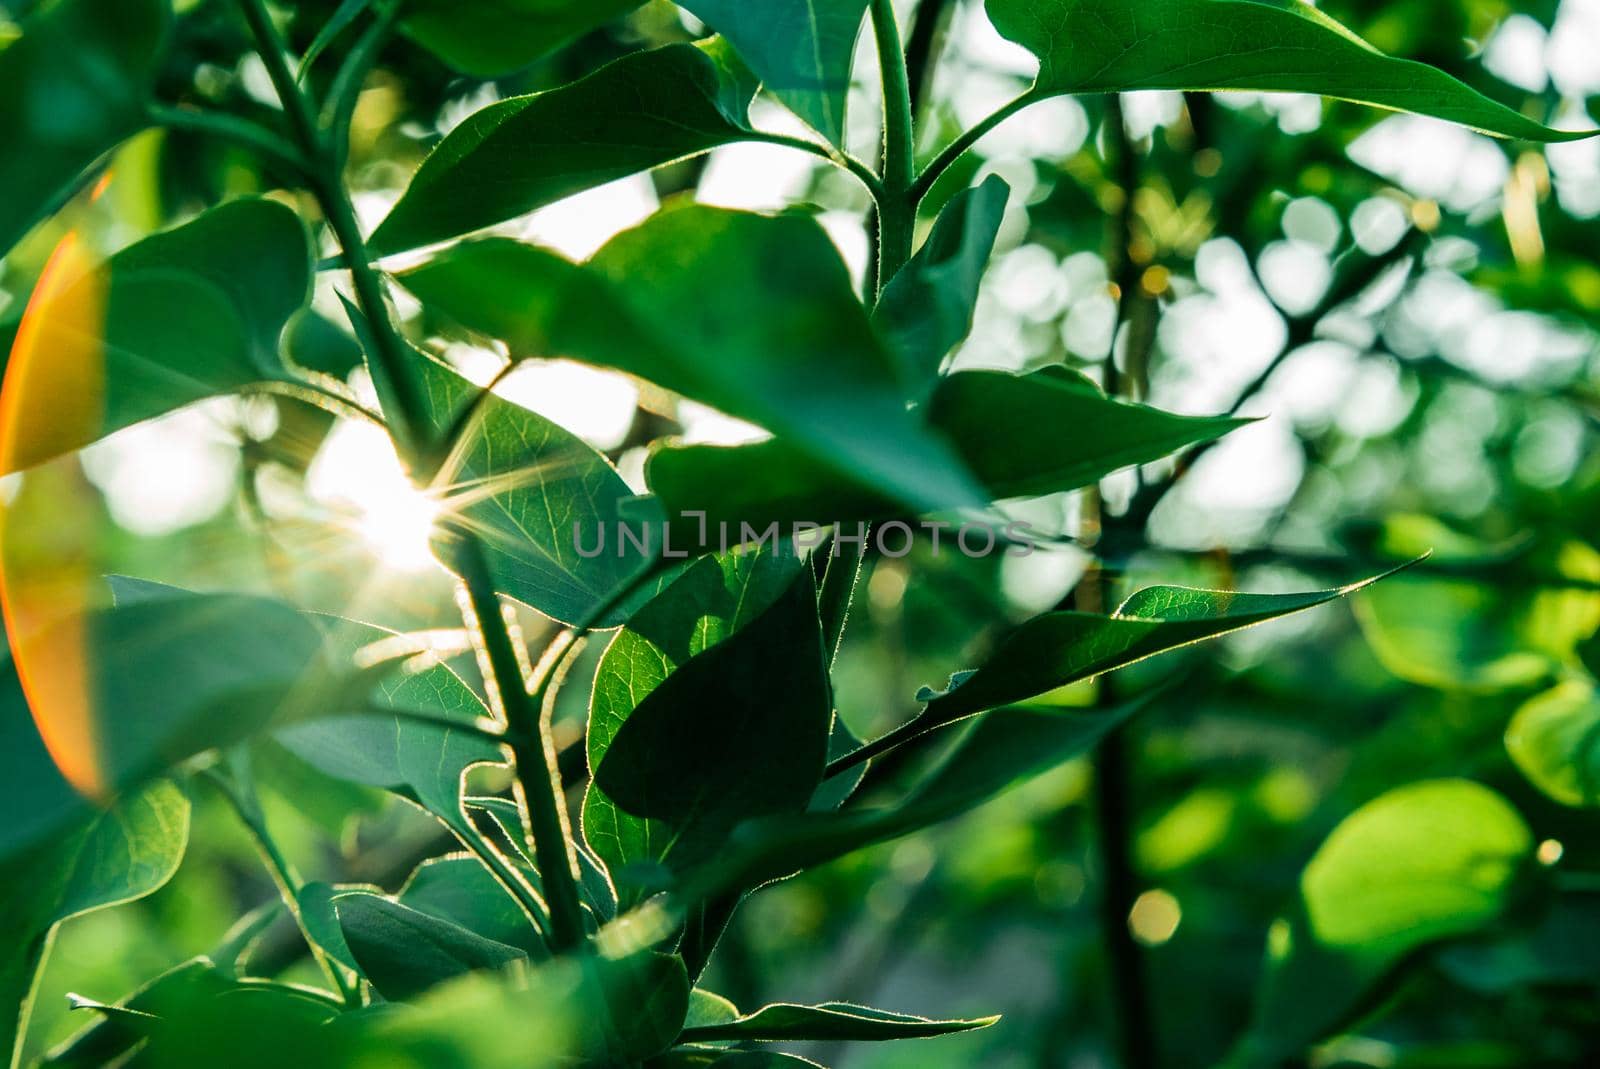 The rays of the sun make their way through the green leaves of the trees. Live texture with green leaves and breaking sun rays. by mosfet_ua